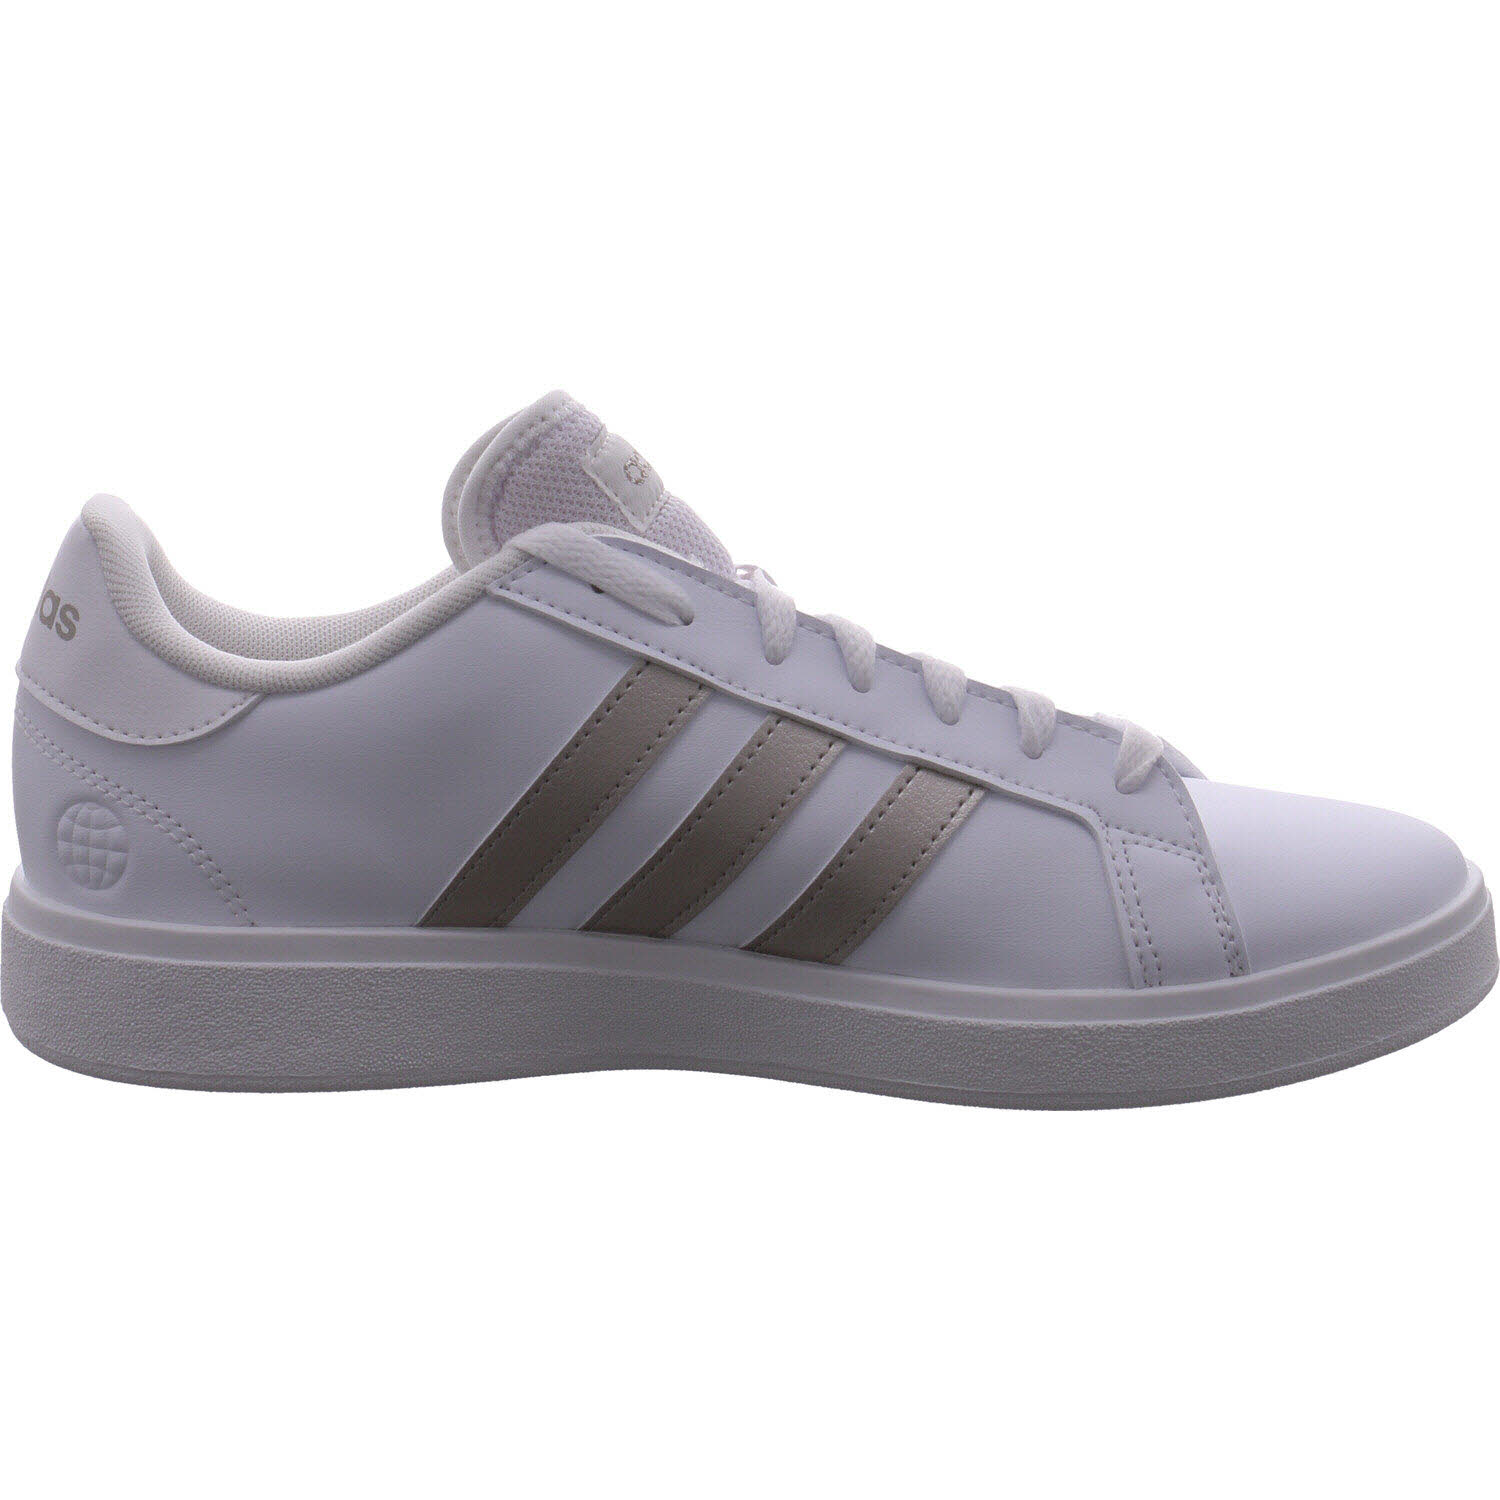 Adidas Sneaker low Grand Court Base 2.0